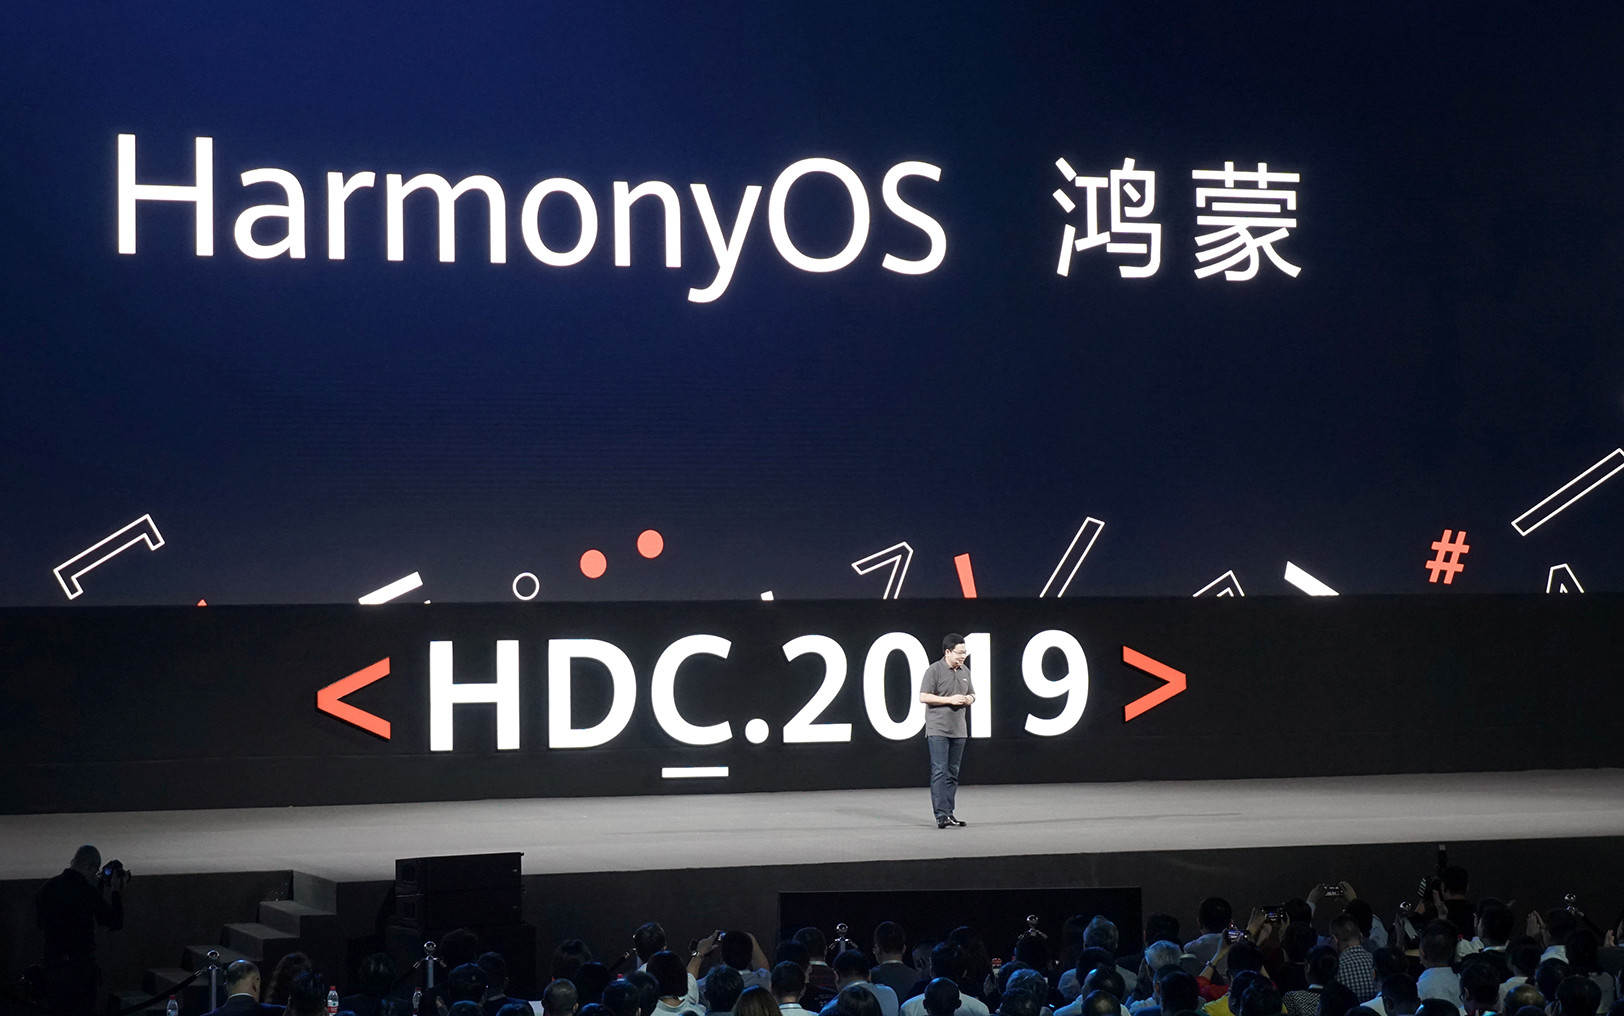 Richard Yu, head of Huawei's consumer business group, unveils the company's new HarmonyOS operating system at the Huawei Developer Conference in Dongguan, Guangdong province, China August 9, 2019.